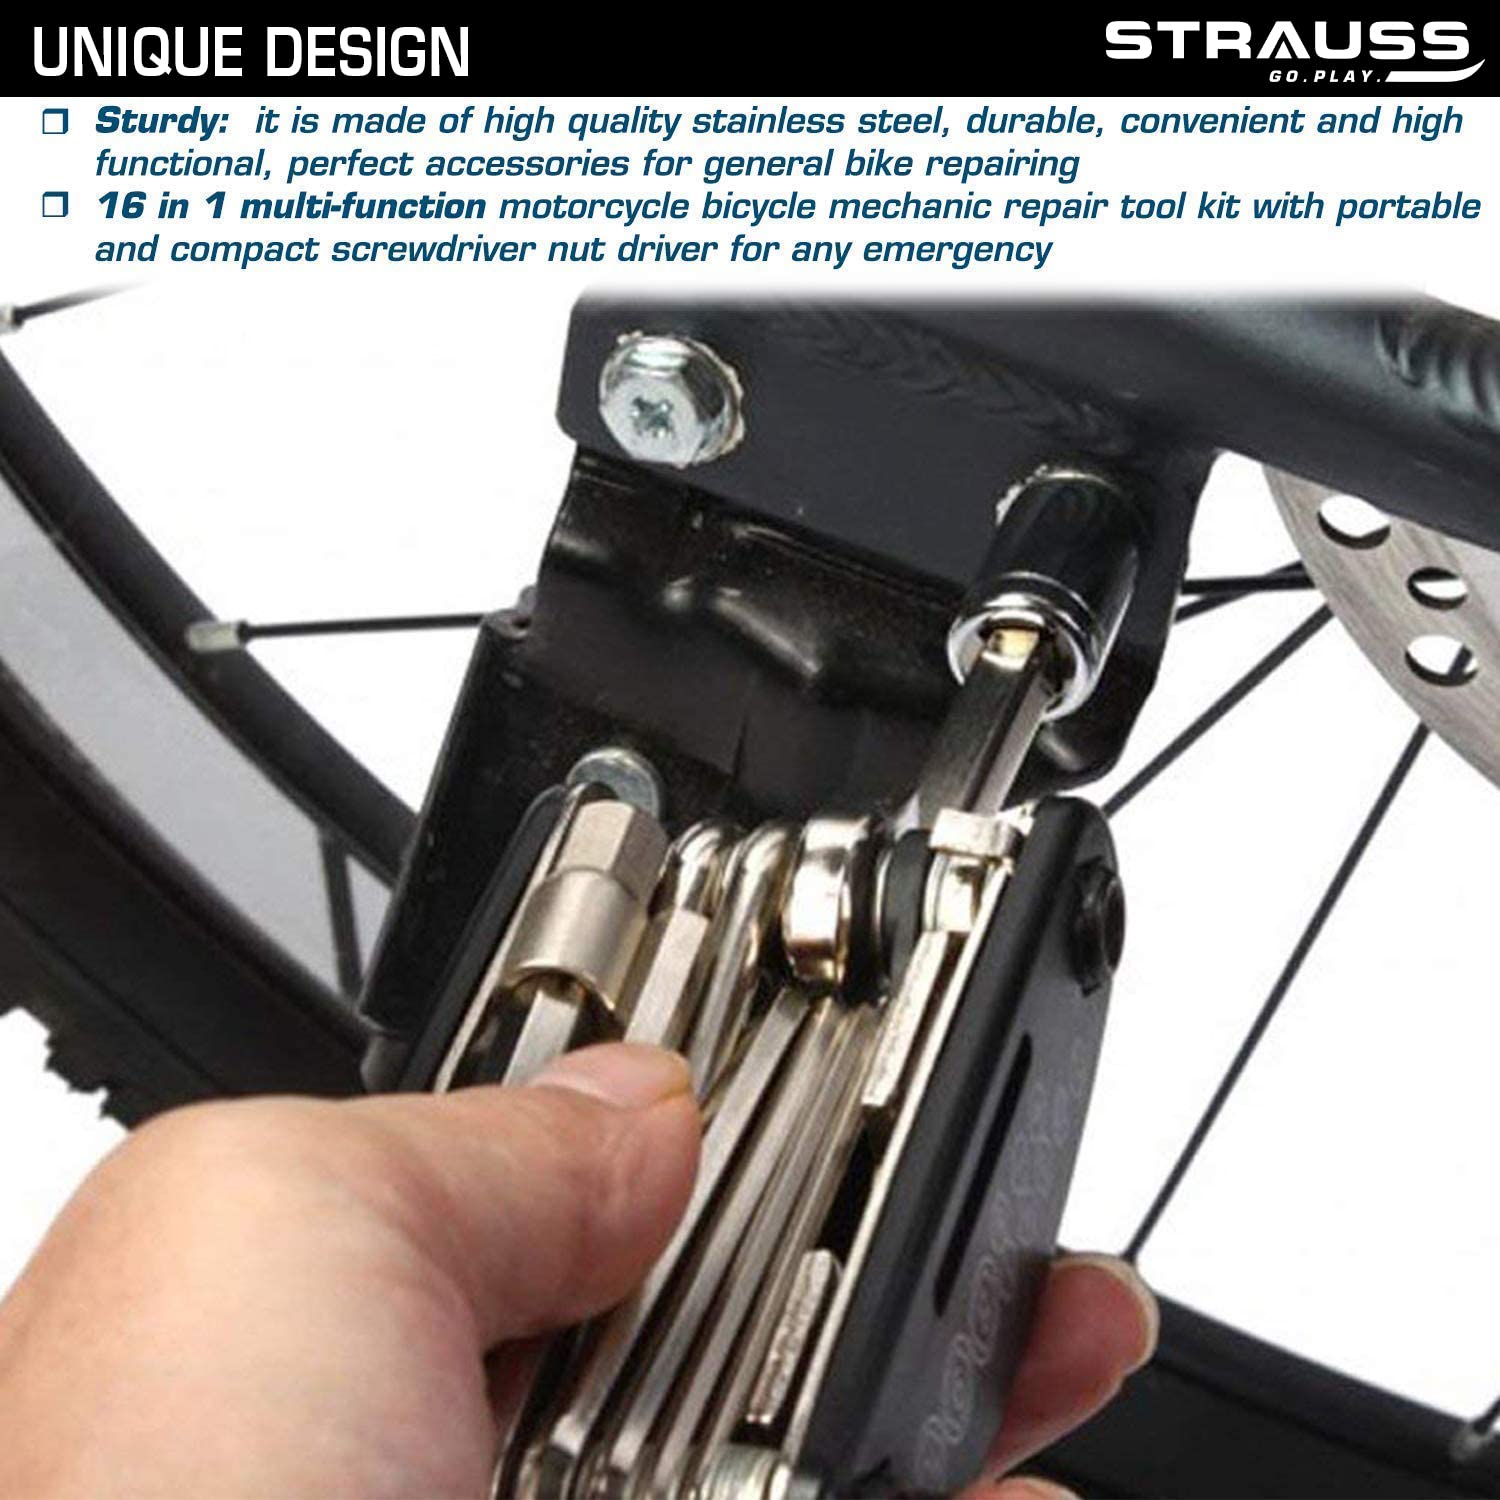 Strauss Bicycle Repair Tool Kit | 16 in 1 Multi-Functional Kit with Screwdrivers, Wrenches, Spanners, Nail Puller & Extension Rod | Portable & Compact